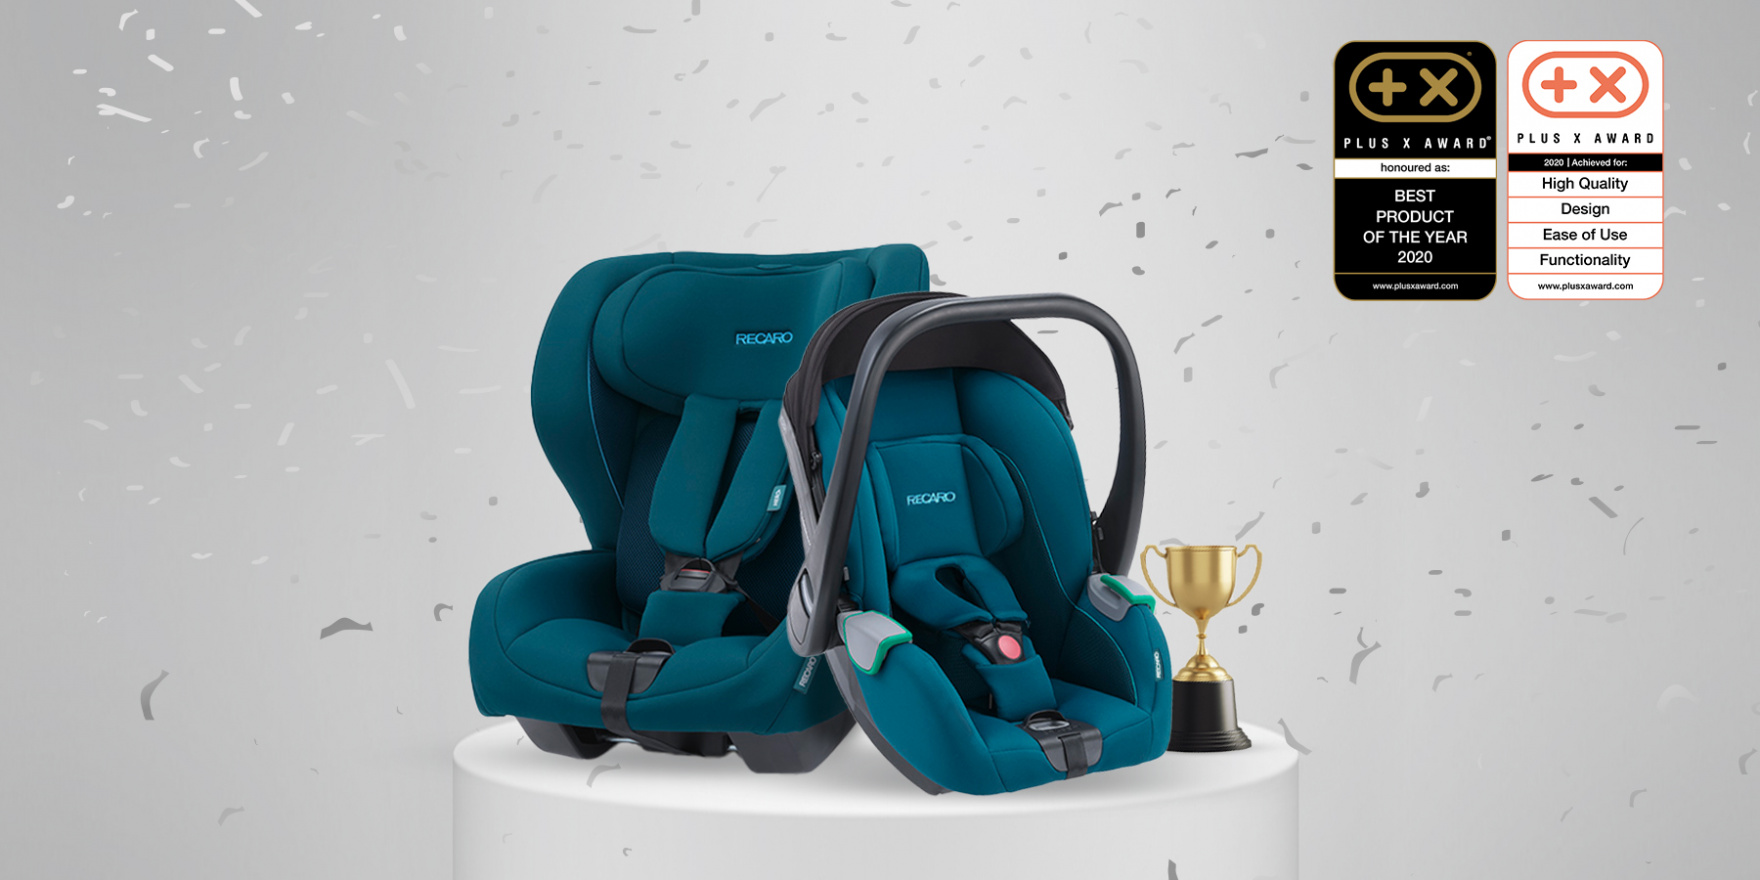 teal car seat and stroller